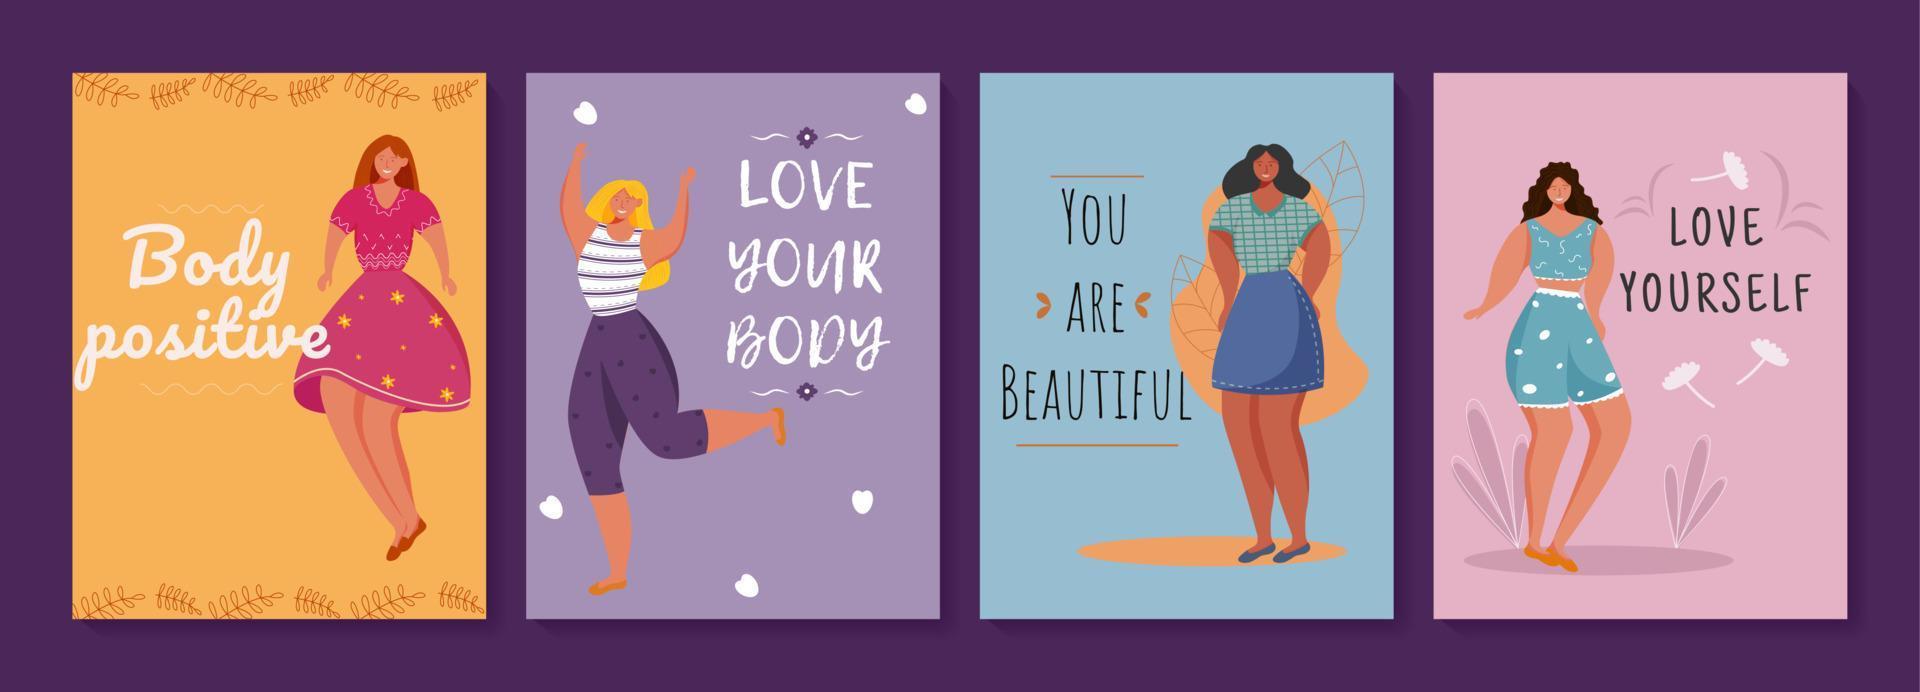 Body positive posters vector template set. Feminism movement. Brochure, cover, booklet page concept design with flat illustrations. Overweight women. Advertising flyer, leaflet, banner layout idea